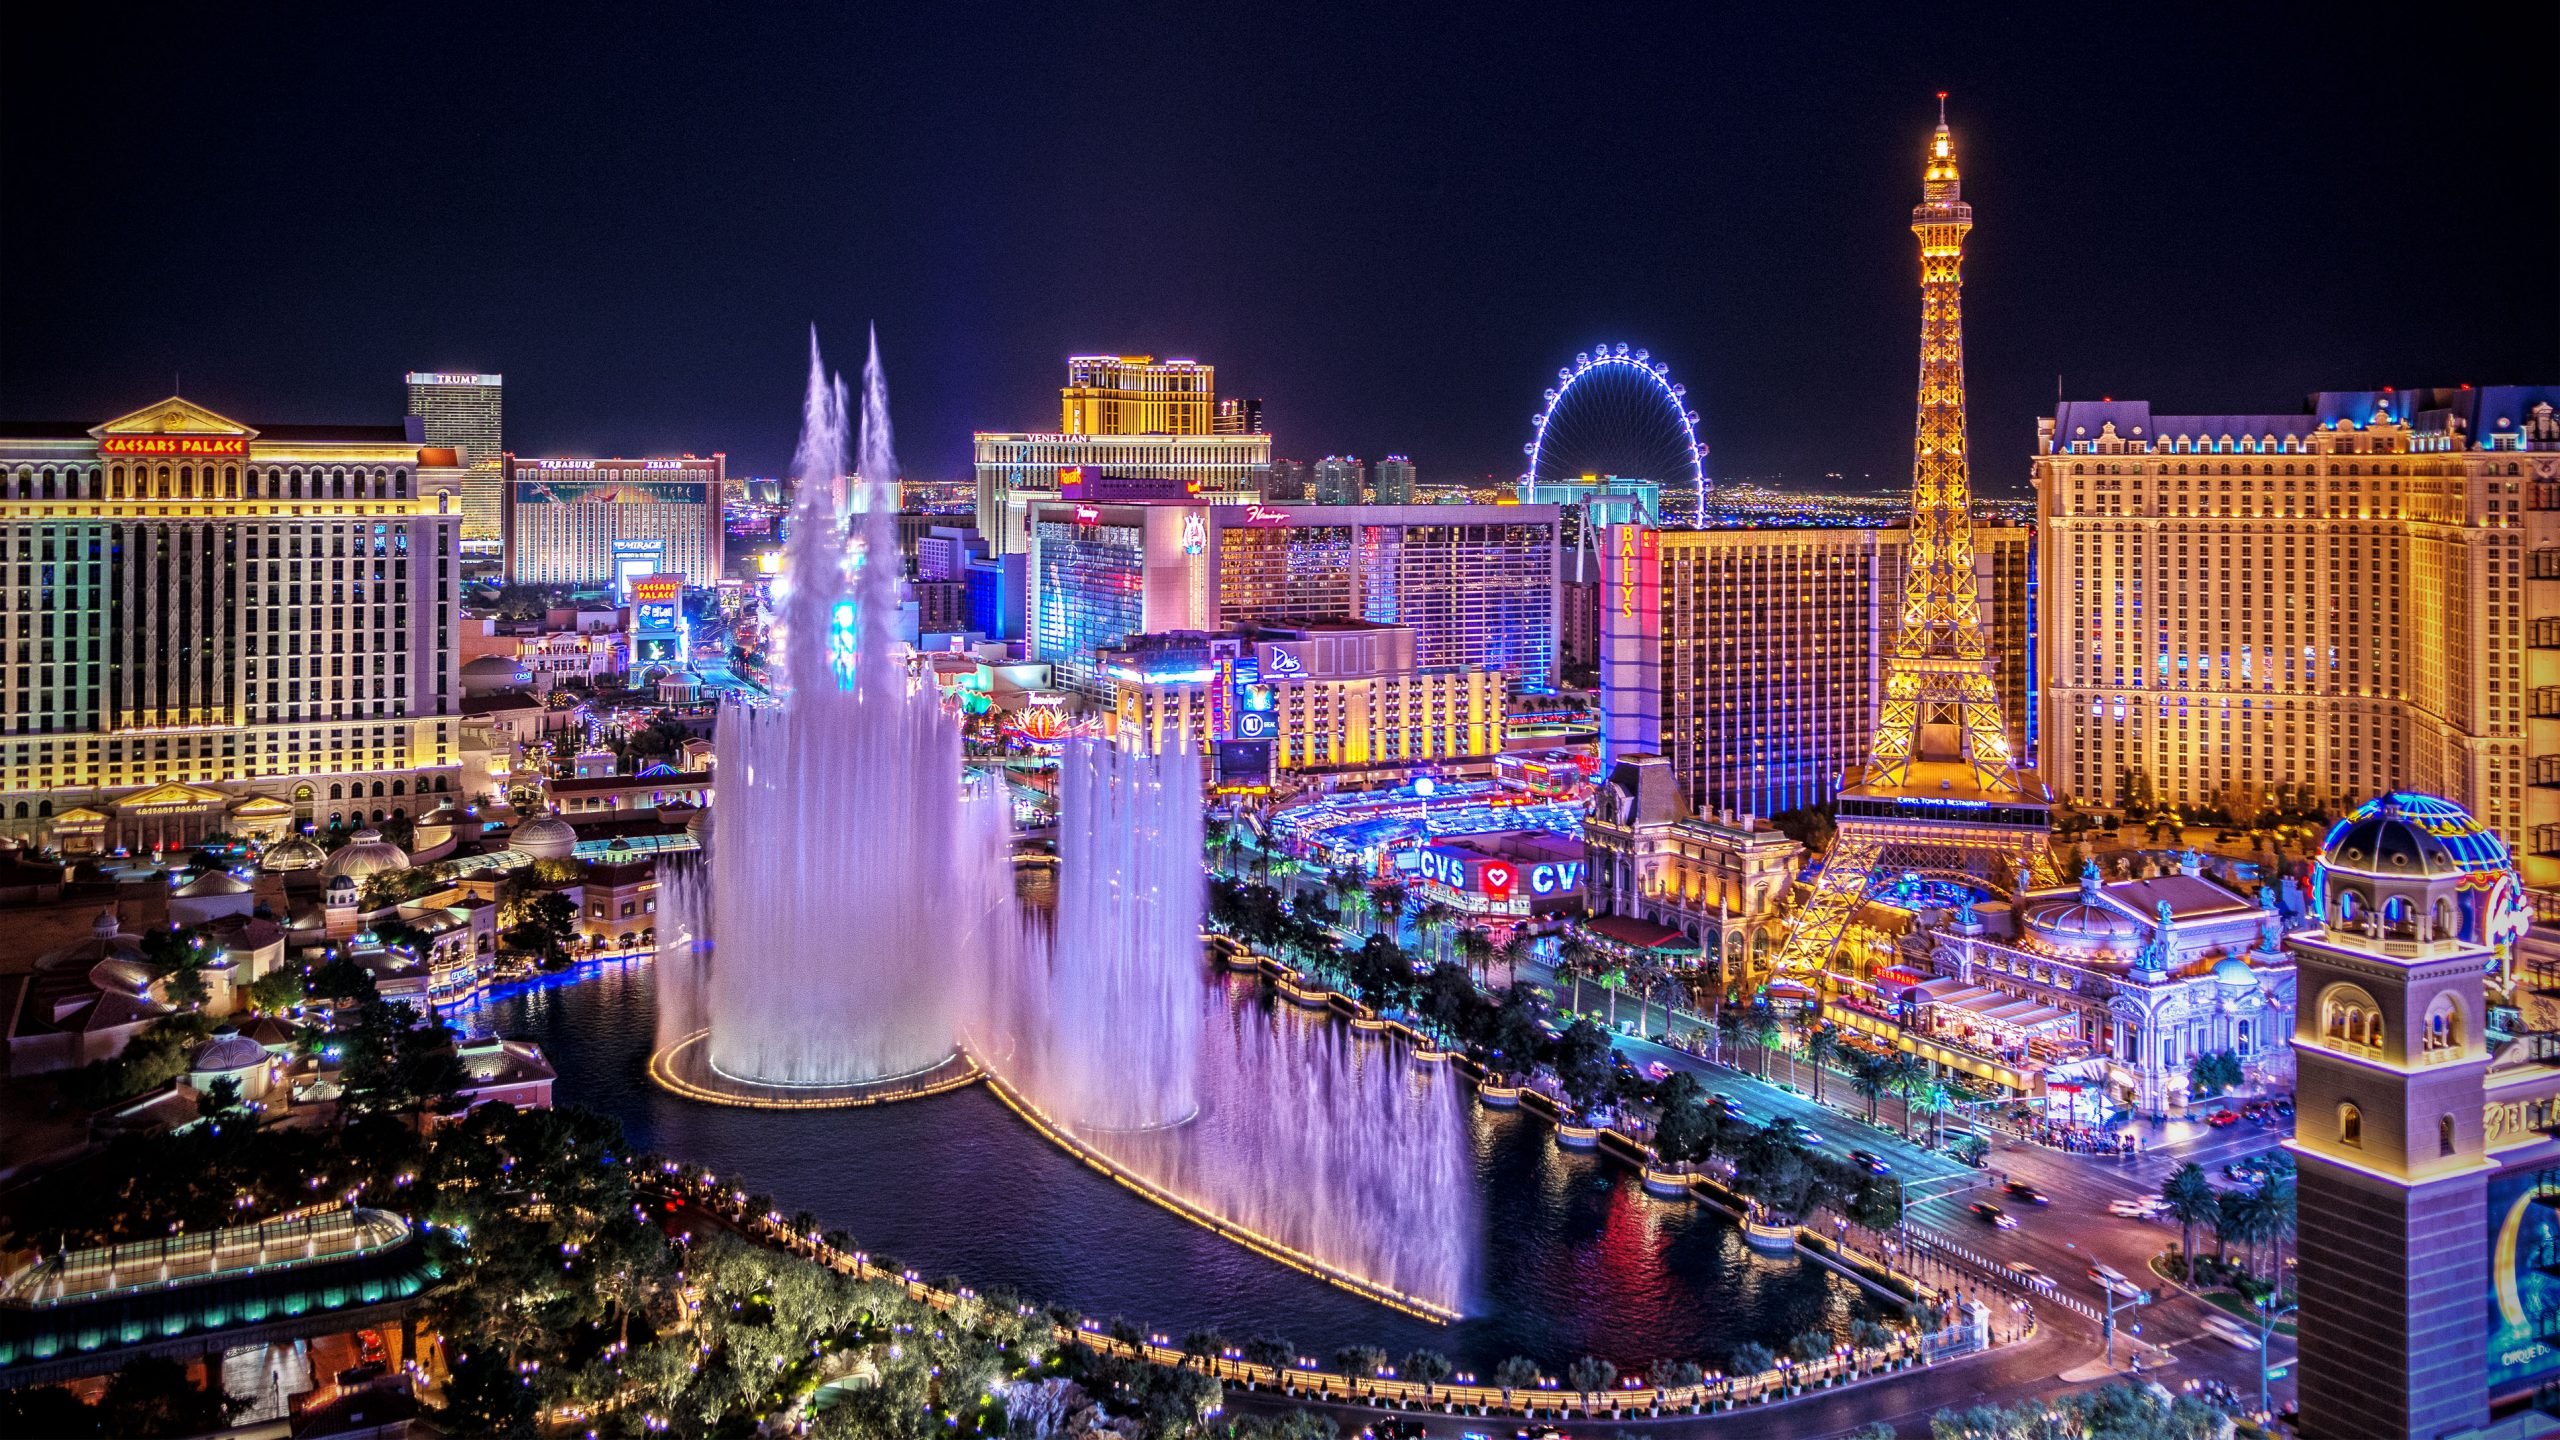 Las Vegas Gaming Revenue Poised To Slump In 2023 Says Fitch 62f8f0ae2825d 